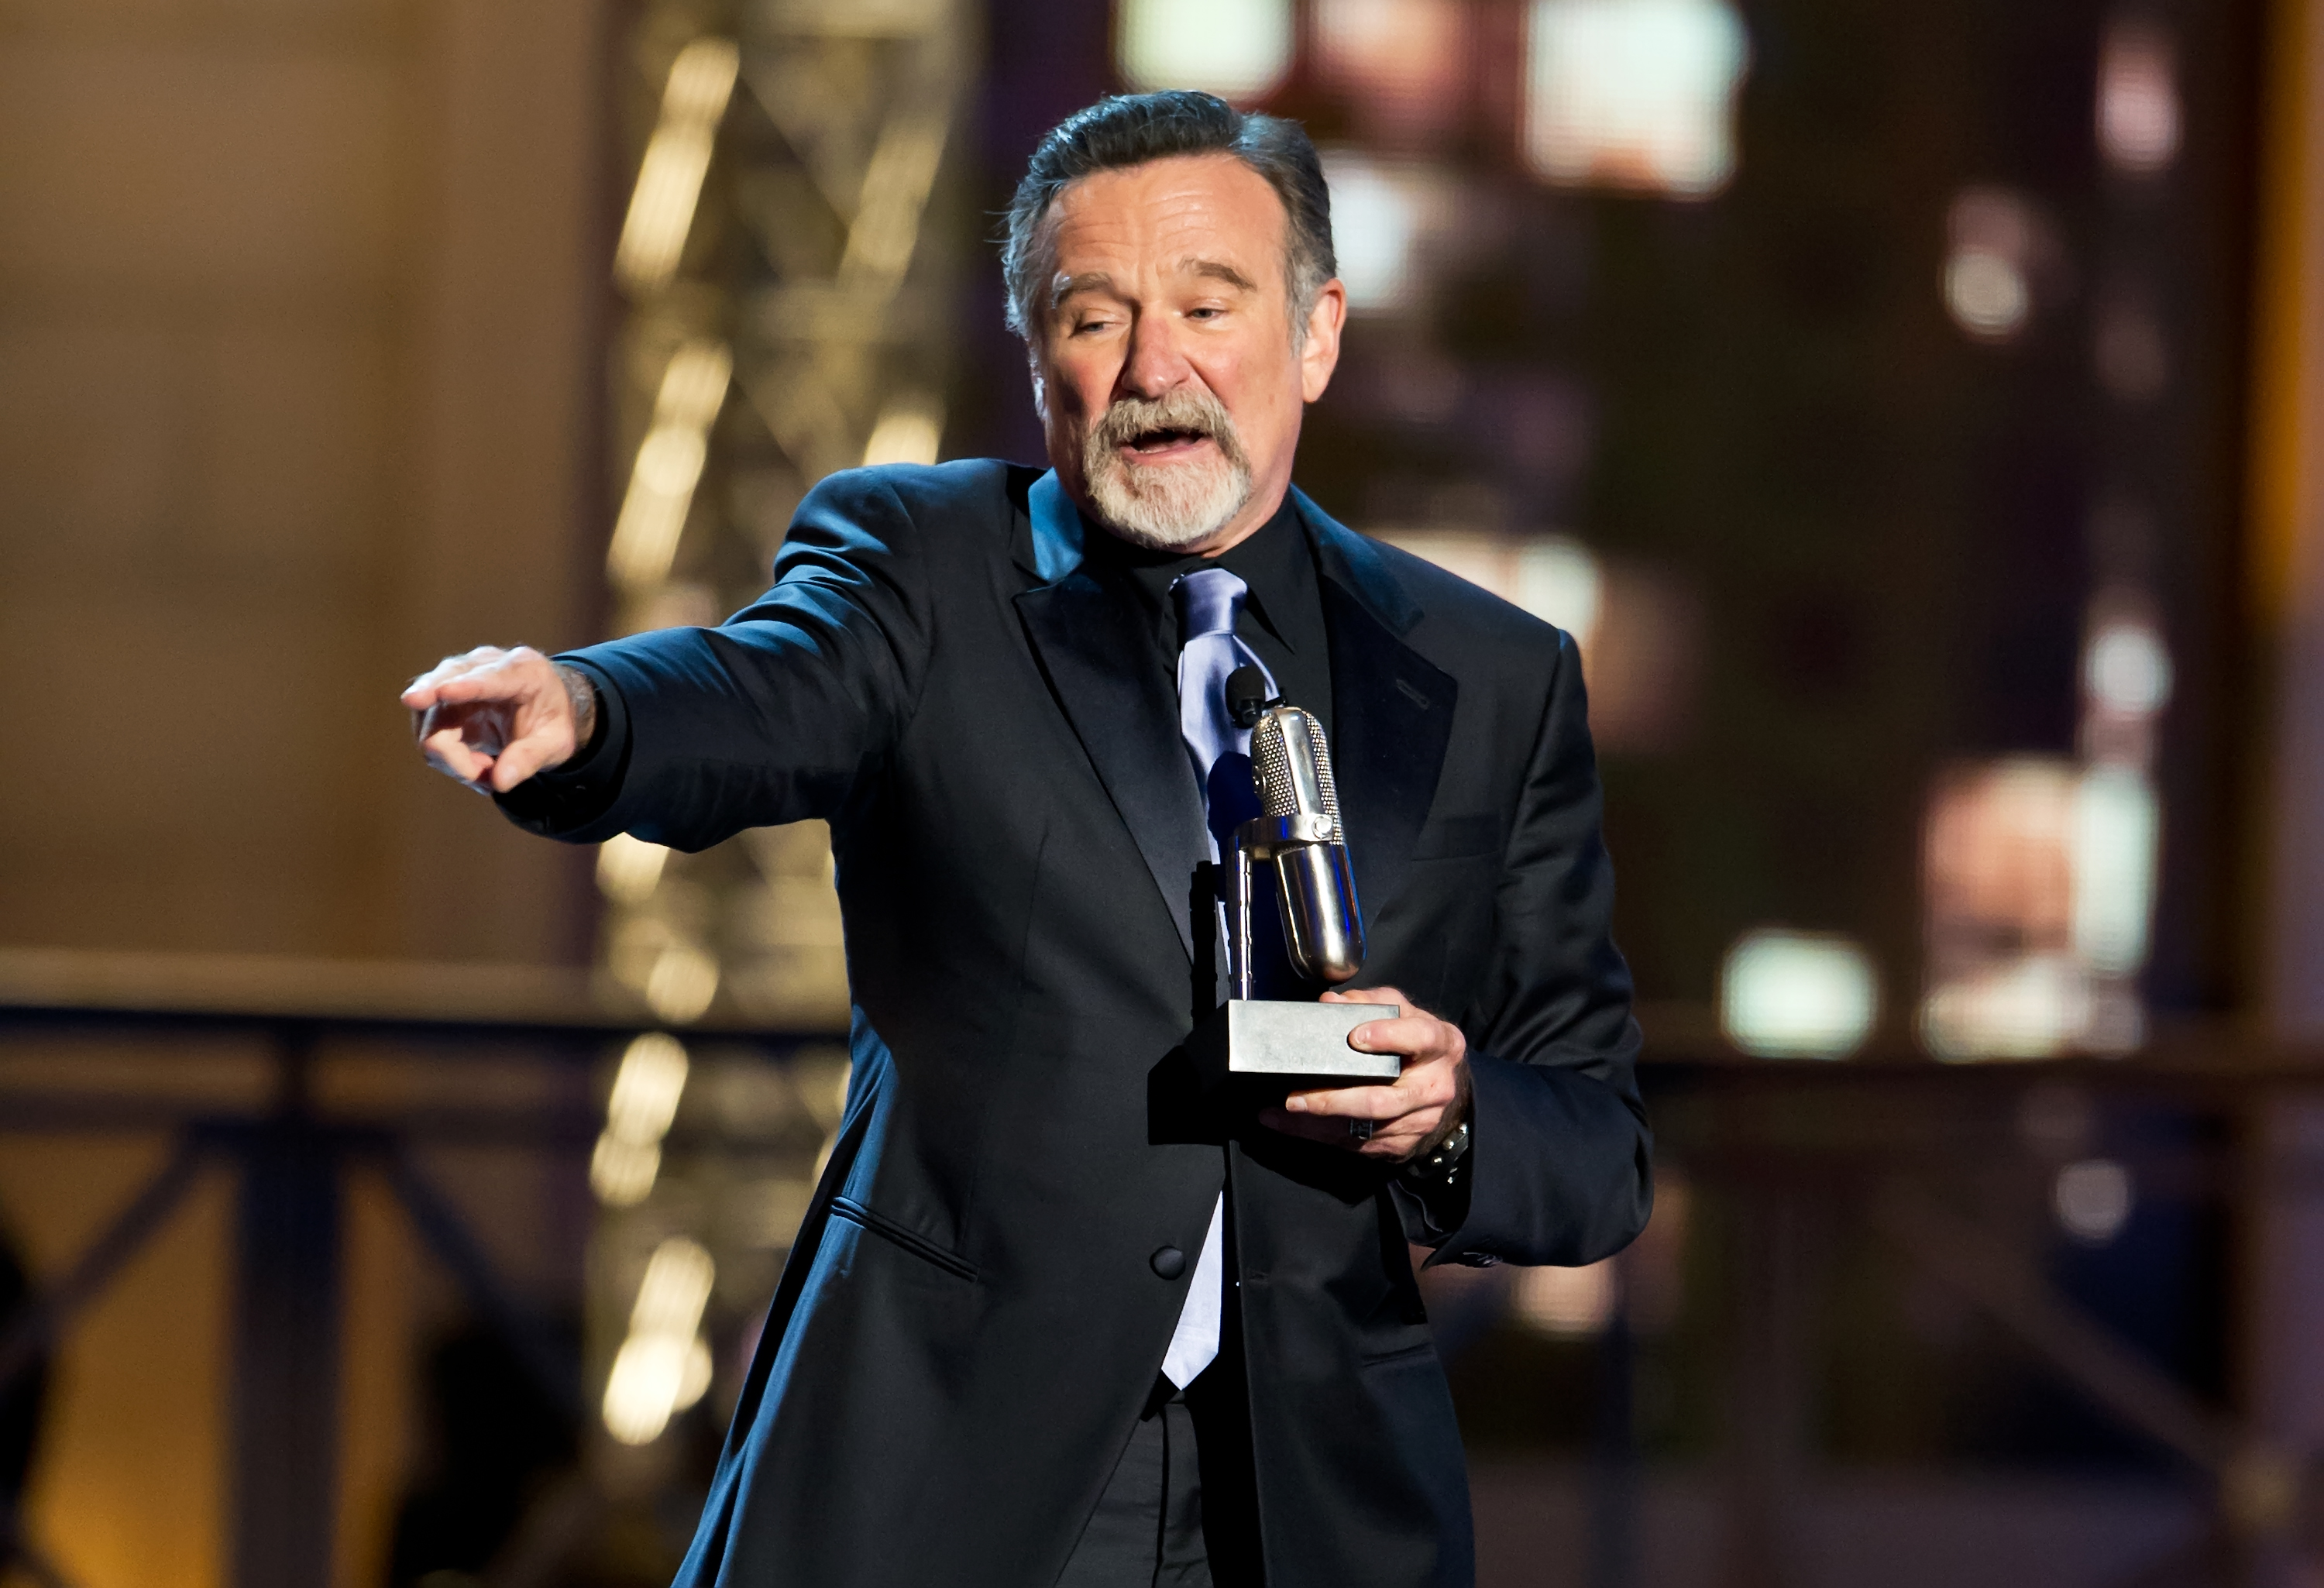 Comedian Robin Williams accepts an award onstage at The Comedy Awards 2012 at Hammerstein Ballroom on April 28, 2012 in New York City. (Gilbert Carrasquillo&mdash;FilmMagic /  Getty Images)